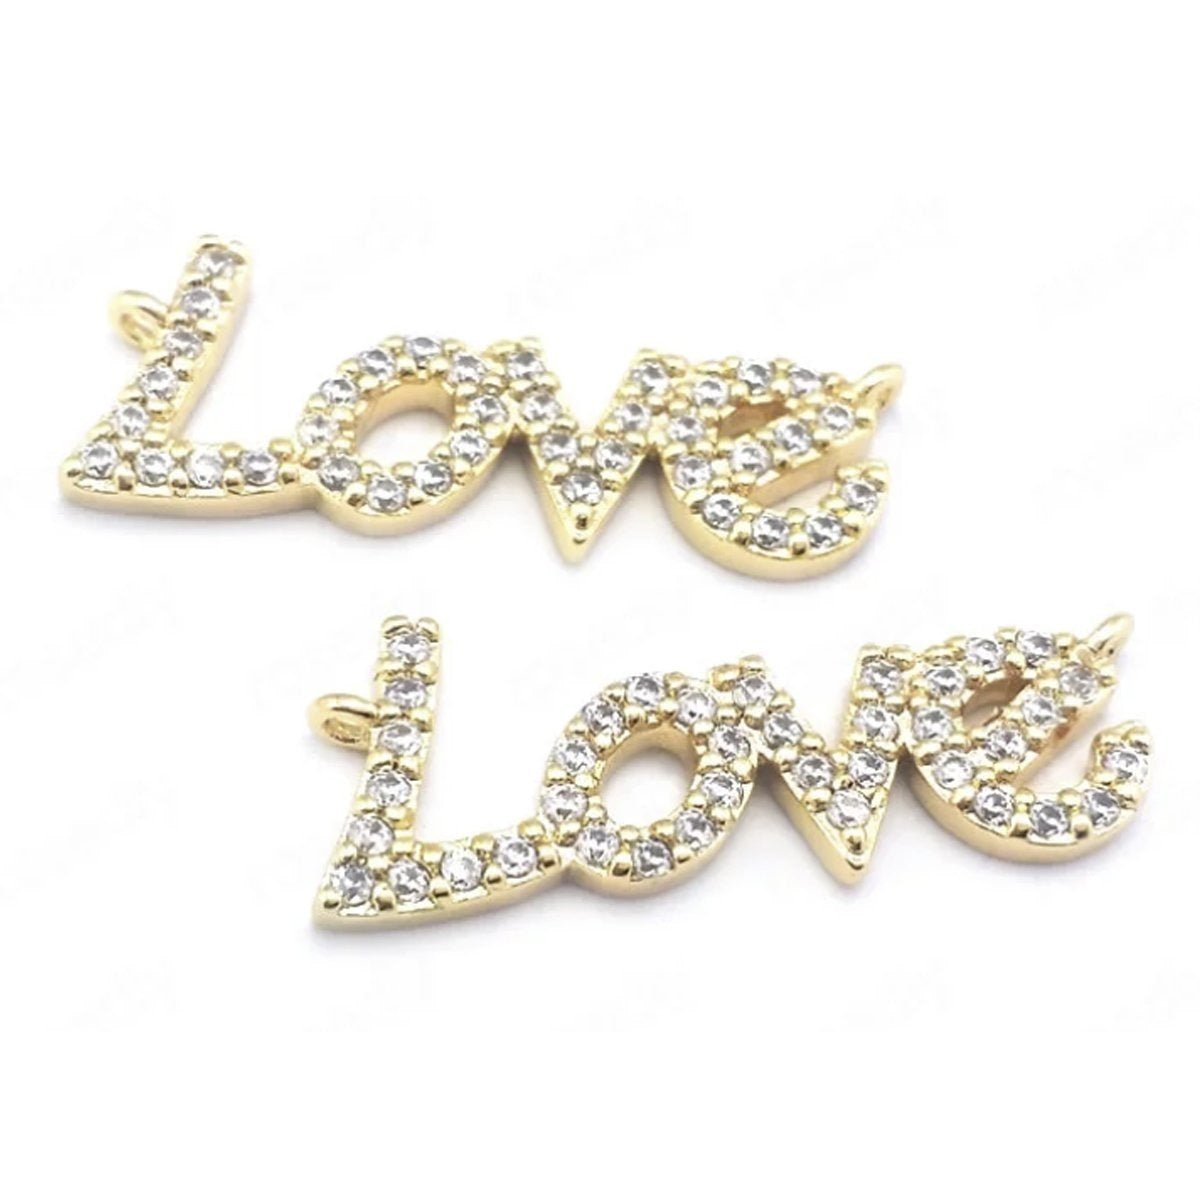 1pcs 24x9mm LOVE Pendant Gold Colour Letters Crystals Charm Pendant Jewellery DIY Accessories - Asia Sell